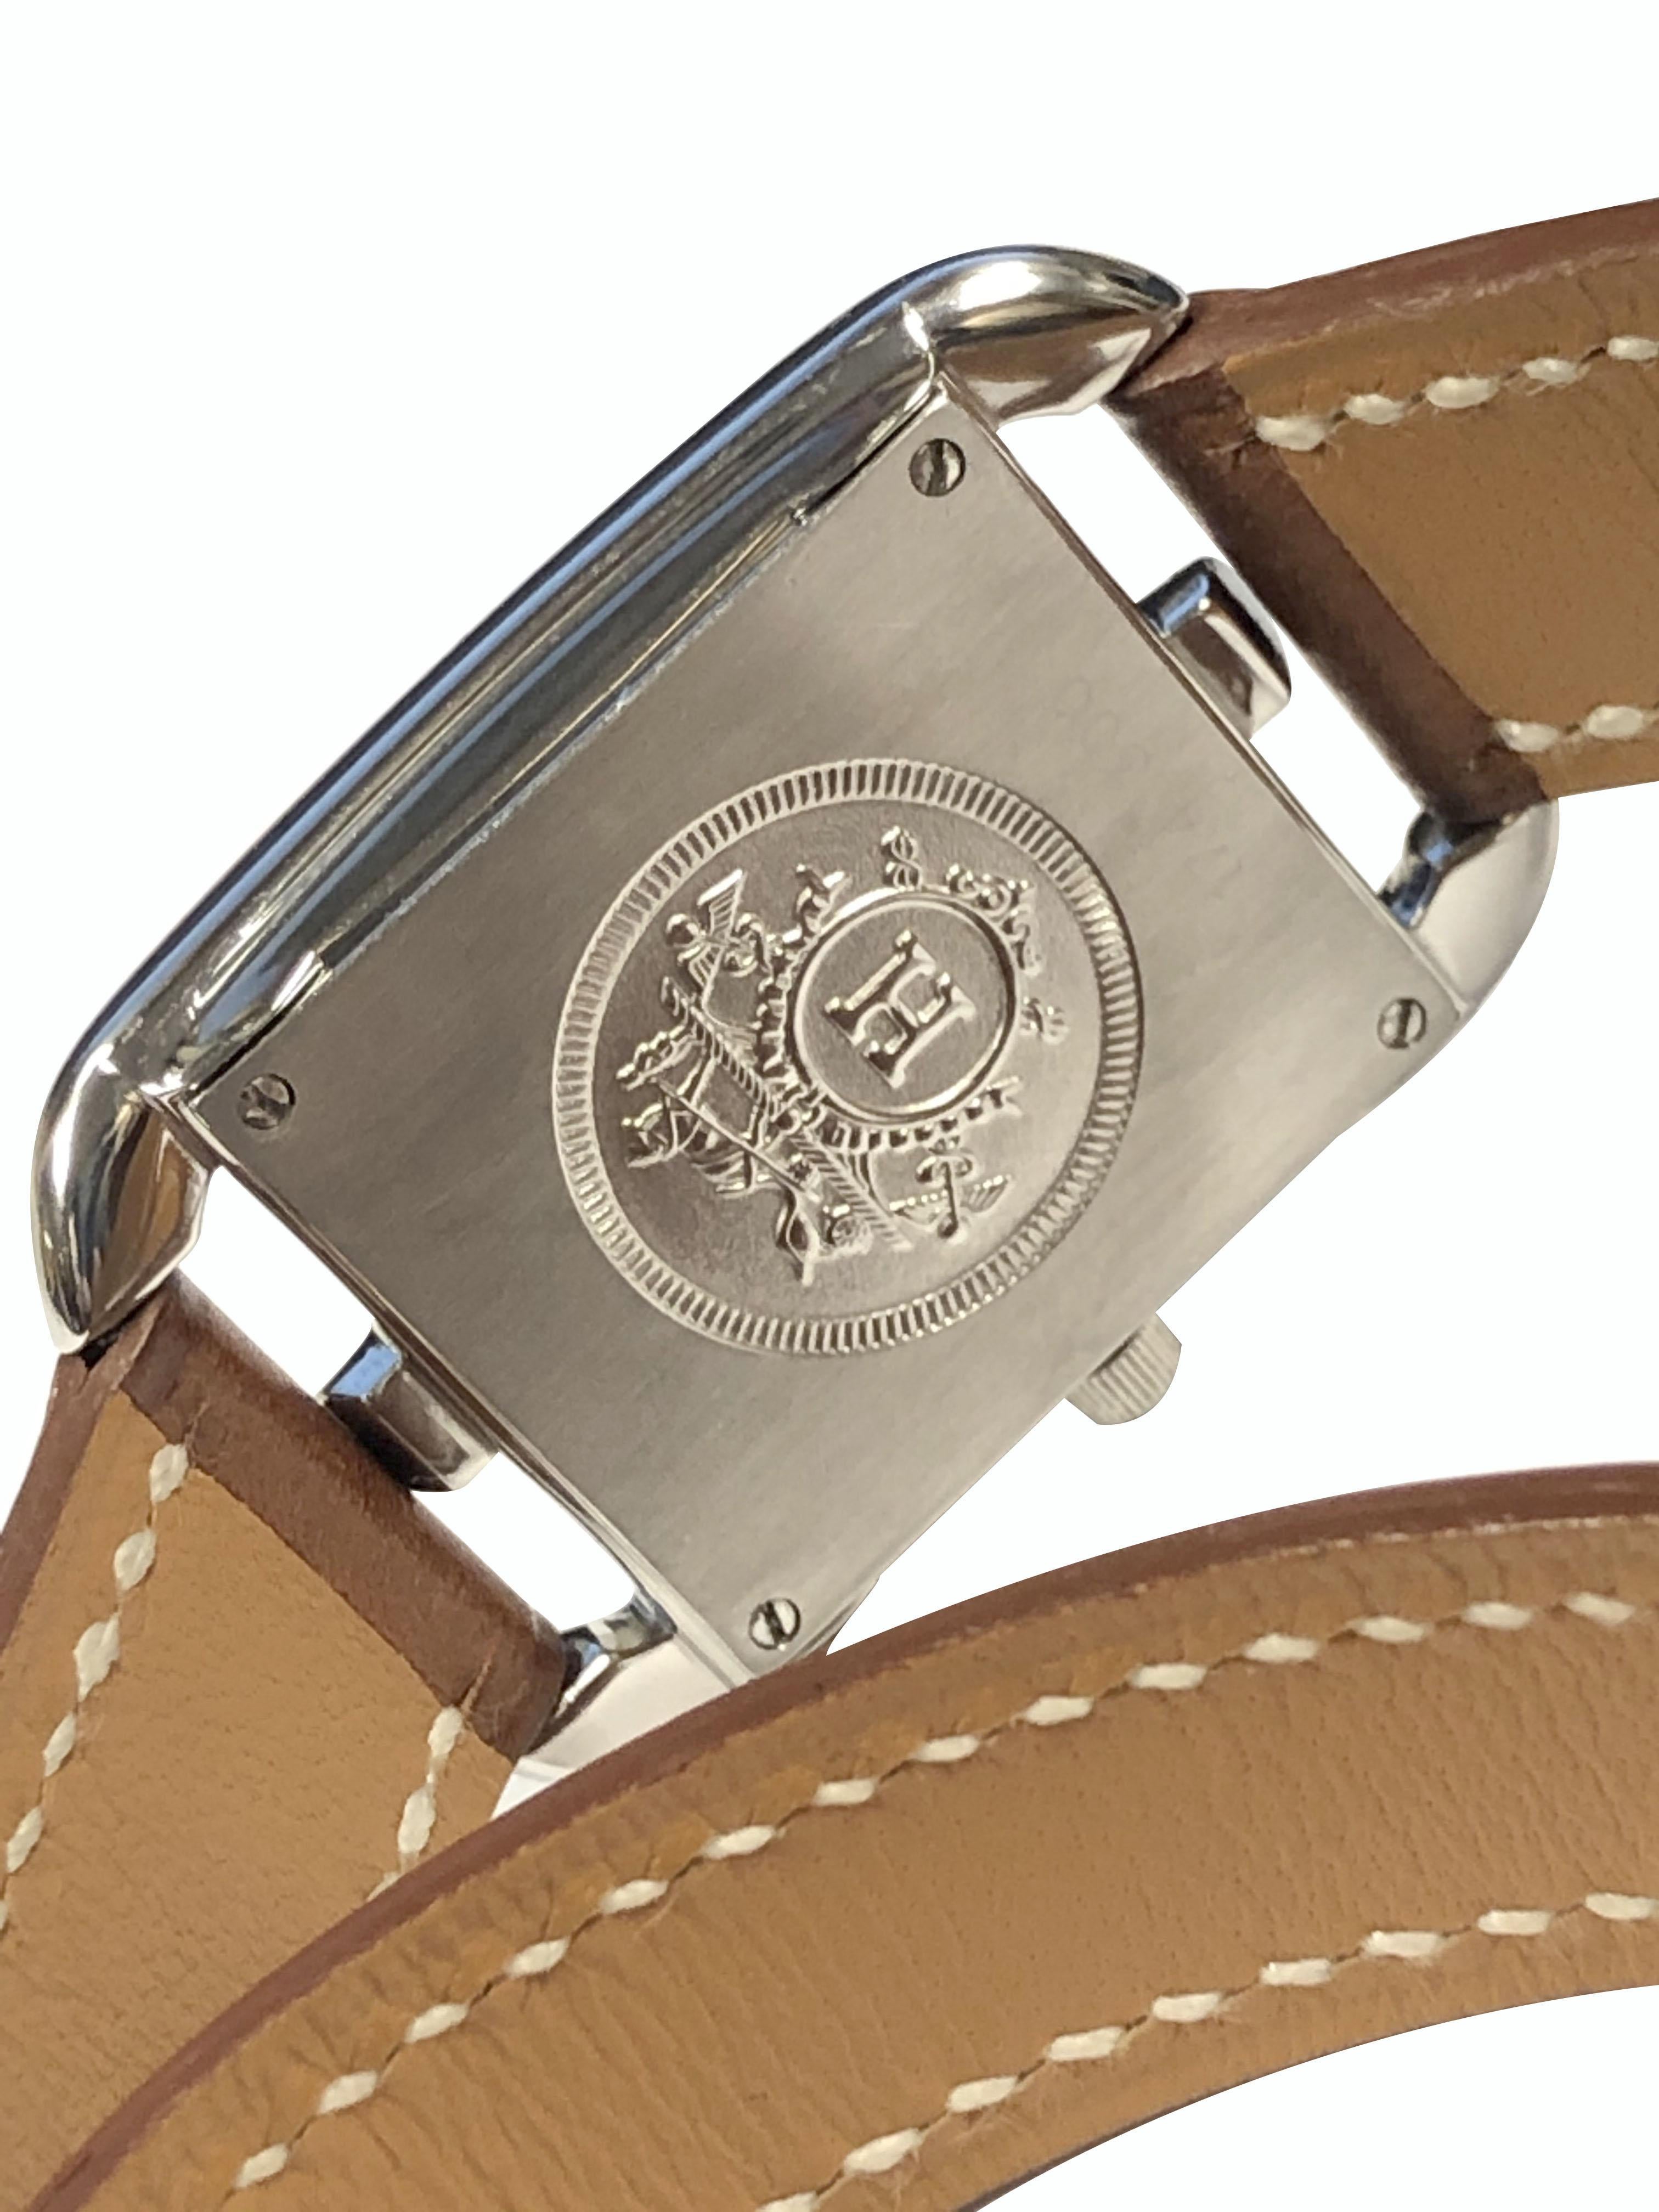 Circa 2015 Hermes Cape Cod Ladies Wrist Watch, 22 X 23 M.M. Stainless Steel 2 piece case, quartz movement, Silver dial with Silver Markers. Light Brown Wrap around Double Tour strap. Recently serviced and comes with a one year warranty. 